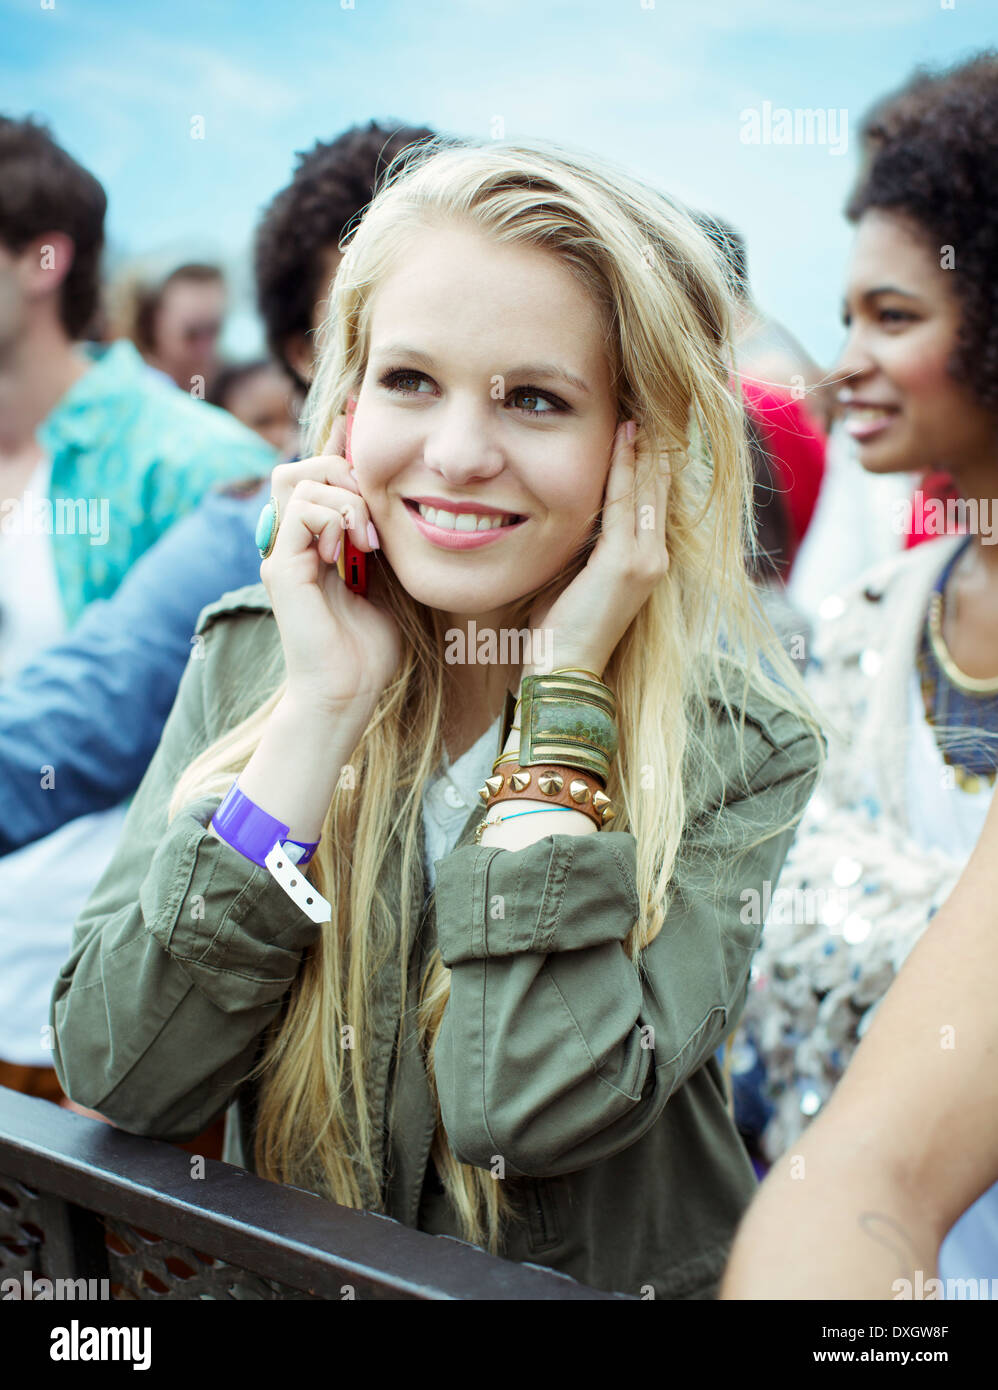 Woman talking on cell phone at music festival Stock Photo